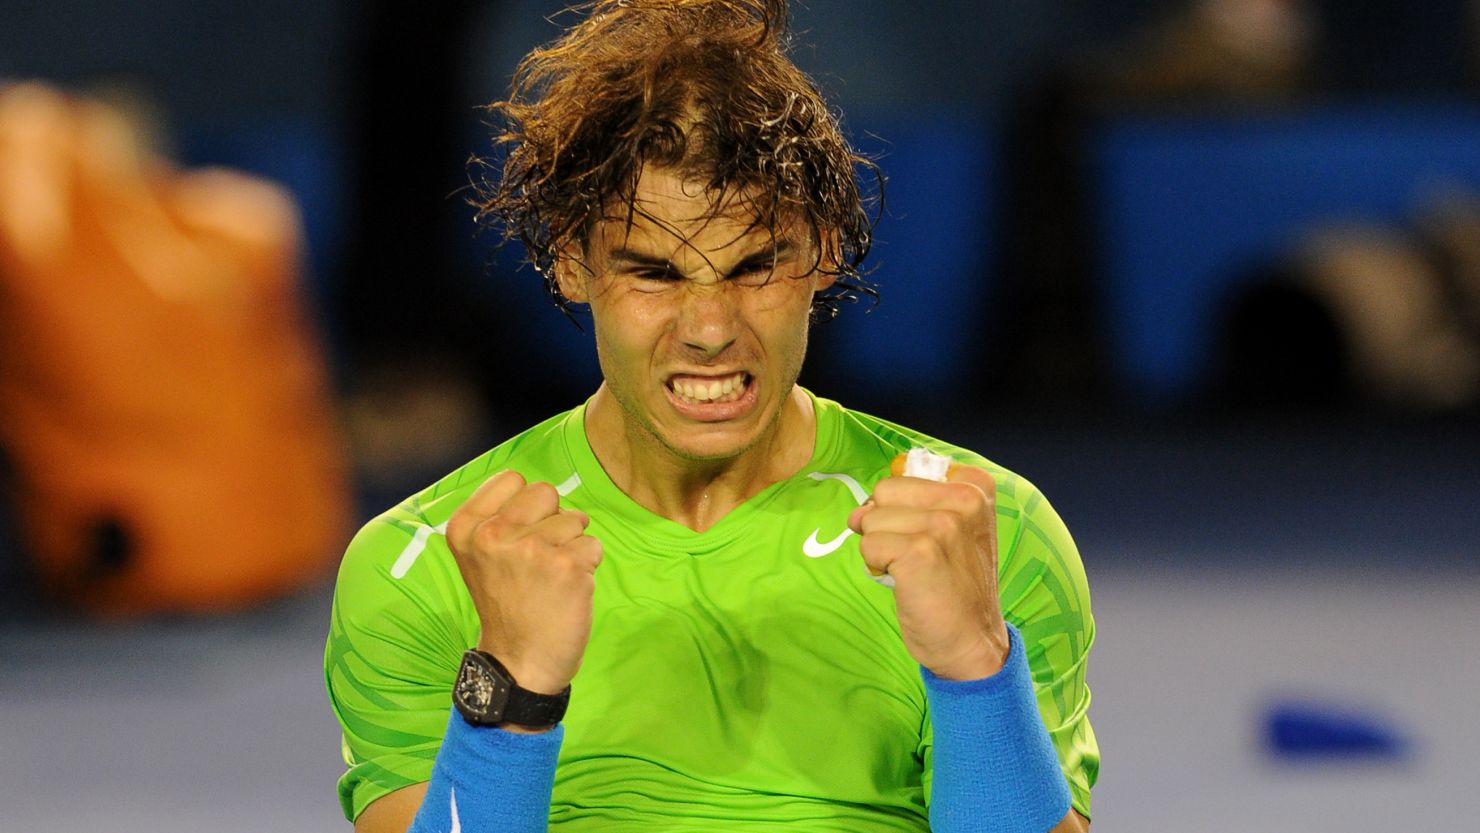 Rafael Nadal celebrates after beating Roger Federer in the semifinals of the Australian Open.